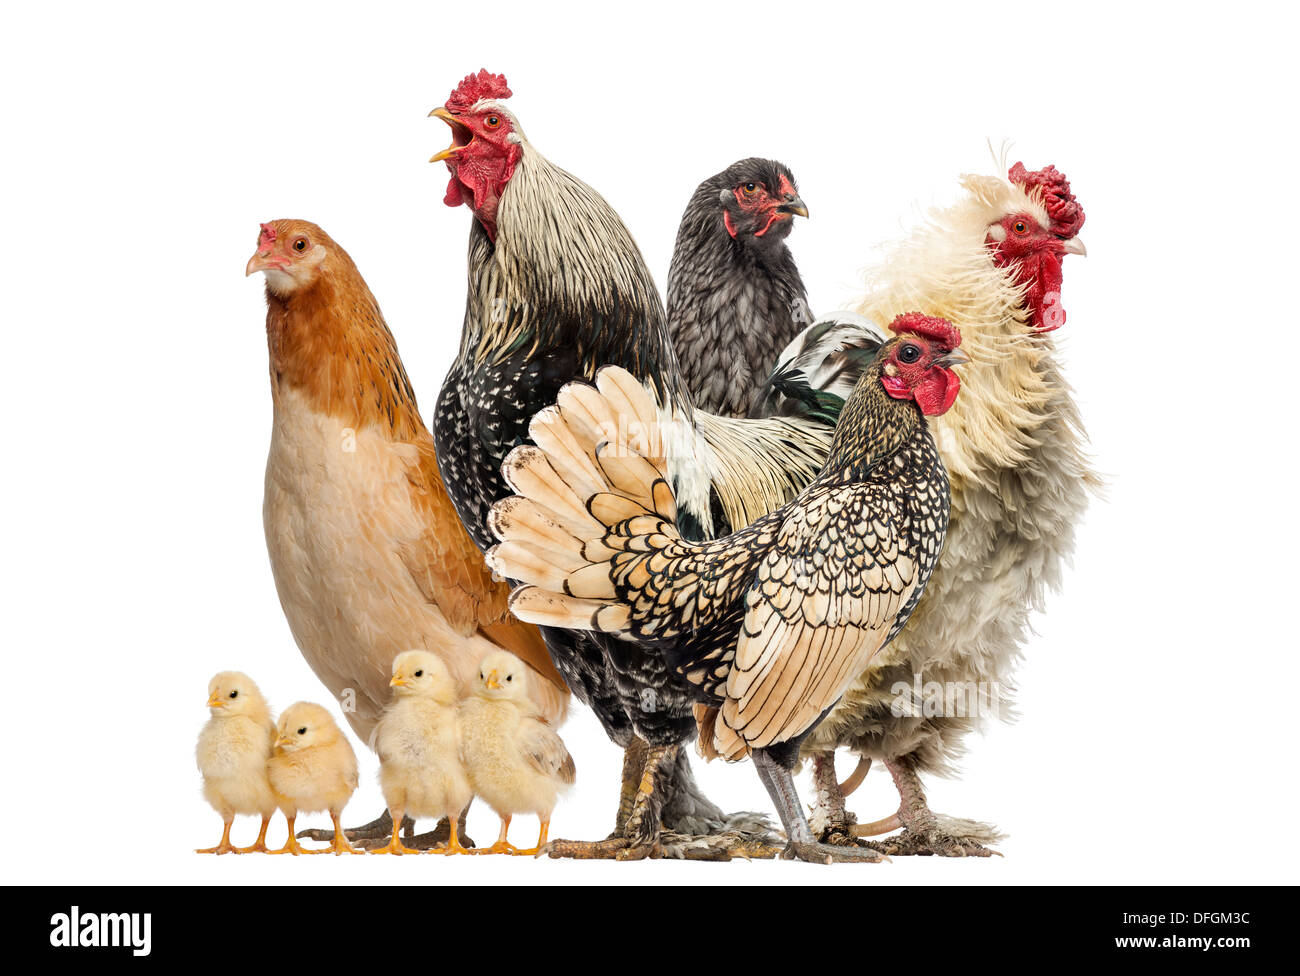 Group of hens, roosters and chicks in front of white background Stock Photo